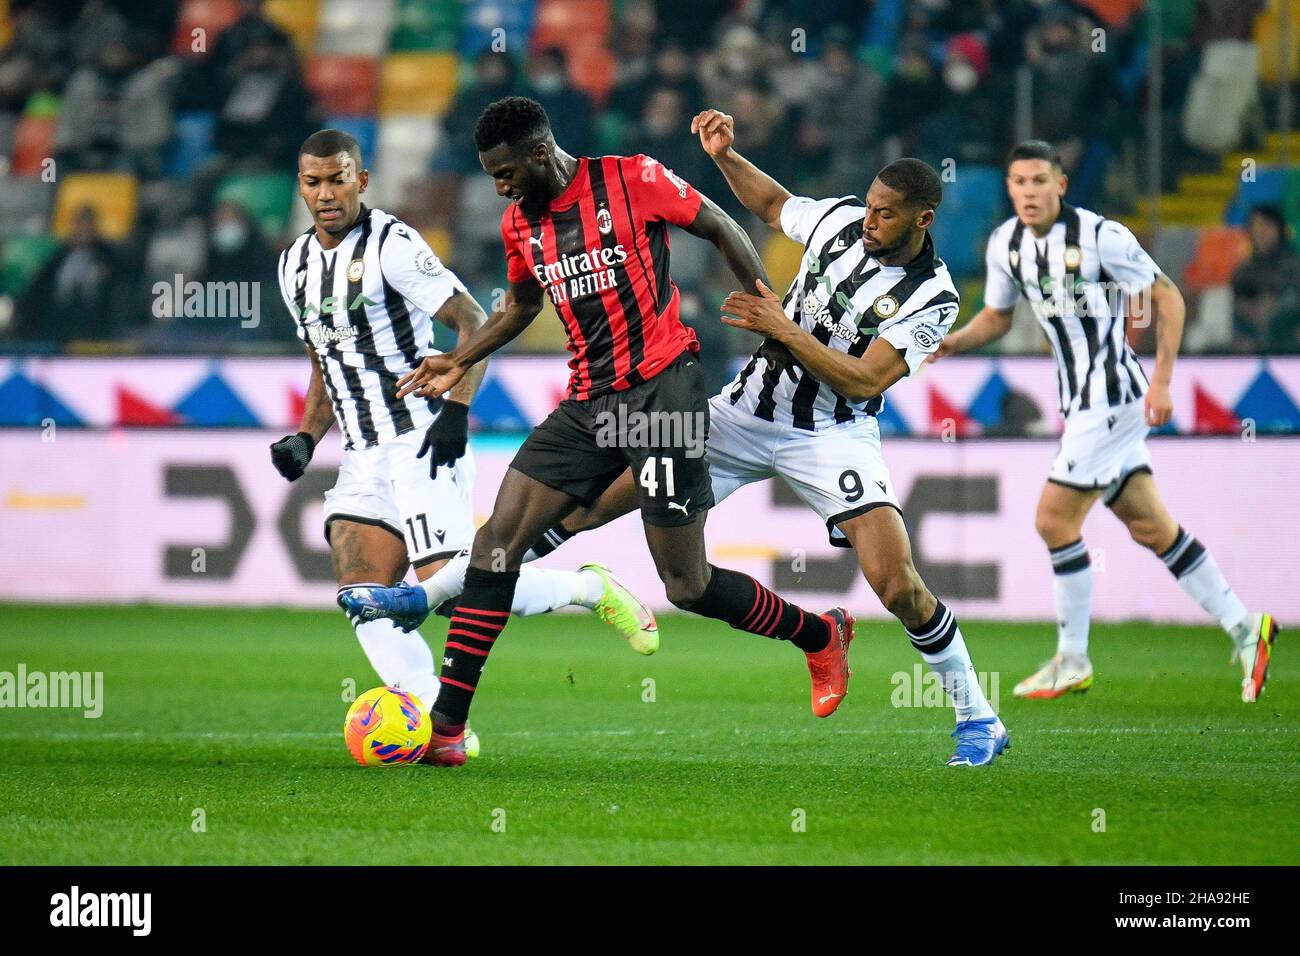 Udine, Italy. 11th Dec, 2021. Milan's Tiemoue Bakayoko in action against Udinese's Norberto Bercique Gomes Betuncal during Udinese Calcio vs AC Milan, italian soccer Serie A match in Udine, Italy, December 11 2021 Credit: Independent Photo Agency/Alamy Live News Stock Photo